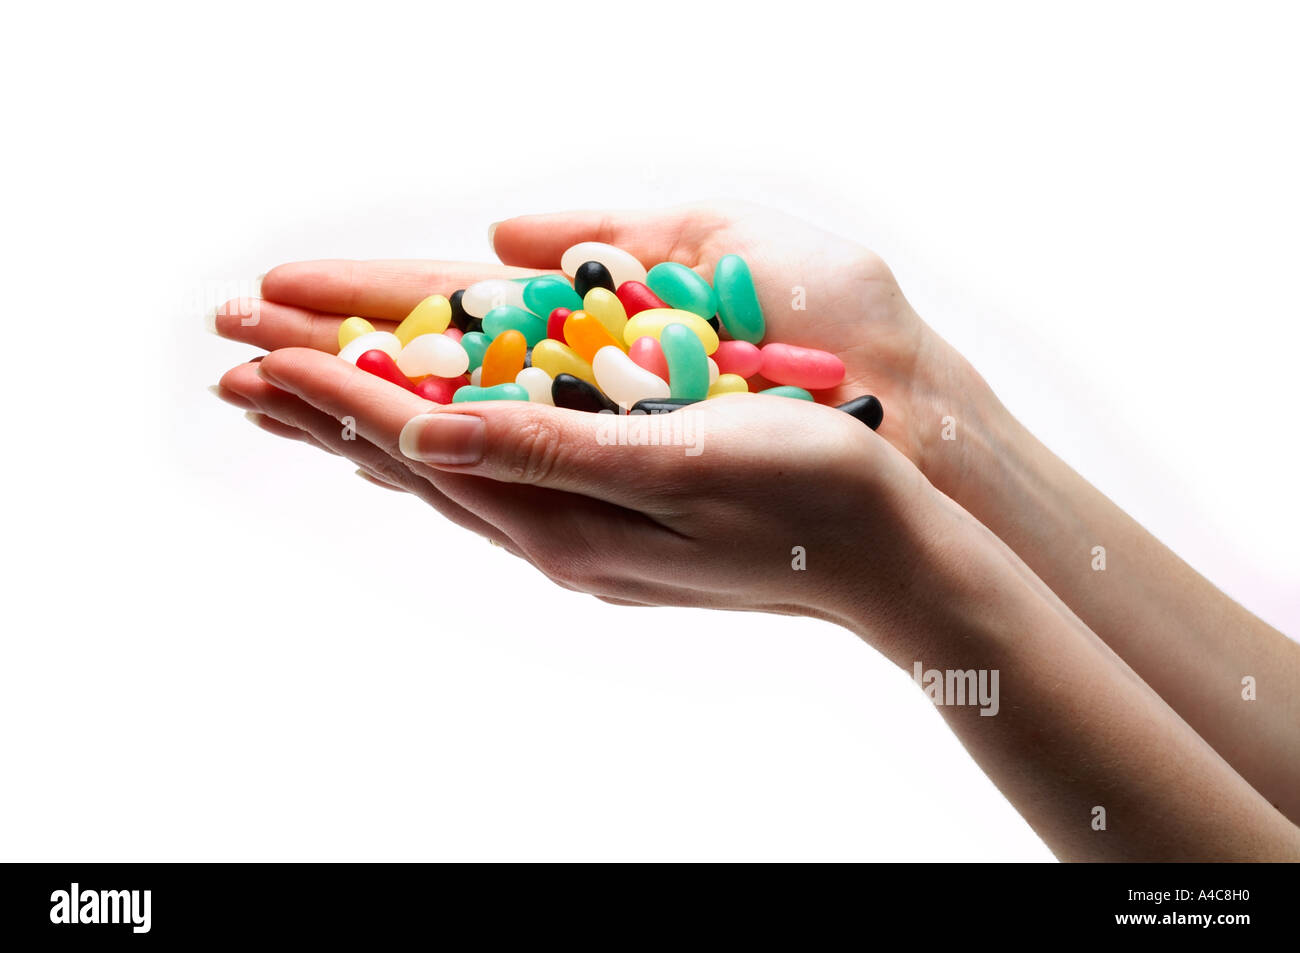 hands, full, gift, giving, palm, give, Jelly, beans, candy, sweet, sweets, sweeties, confectionery, tooth, decay, fillings, dent Stock Photo